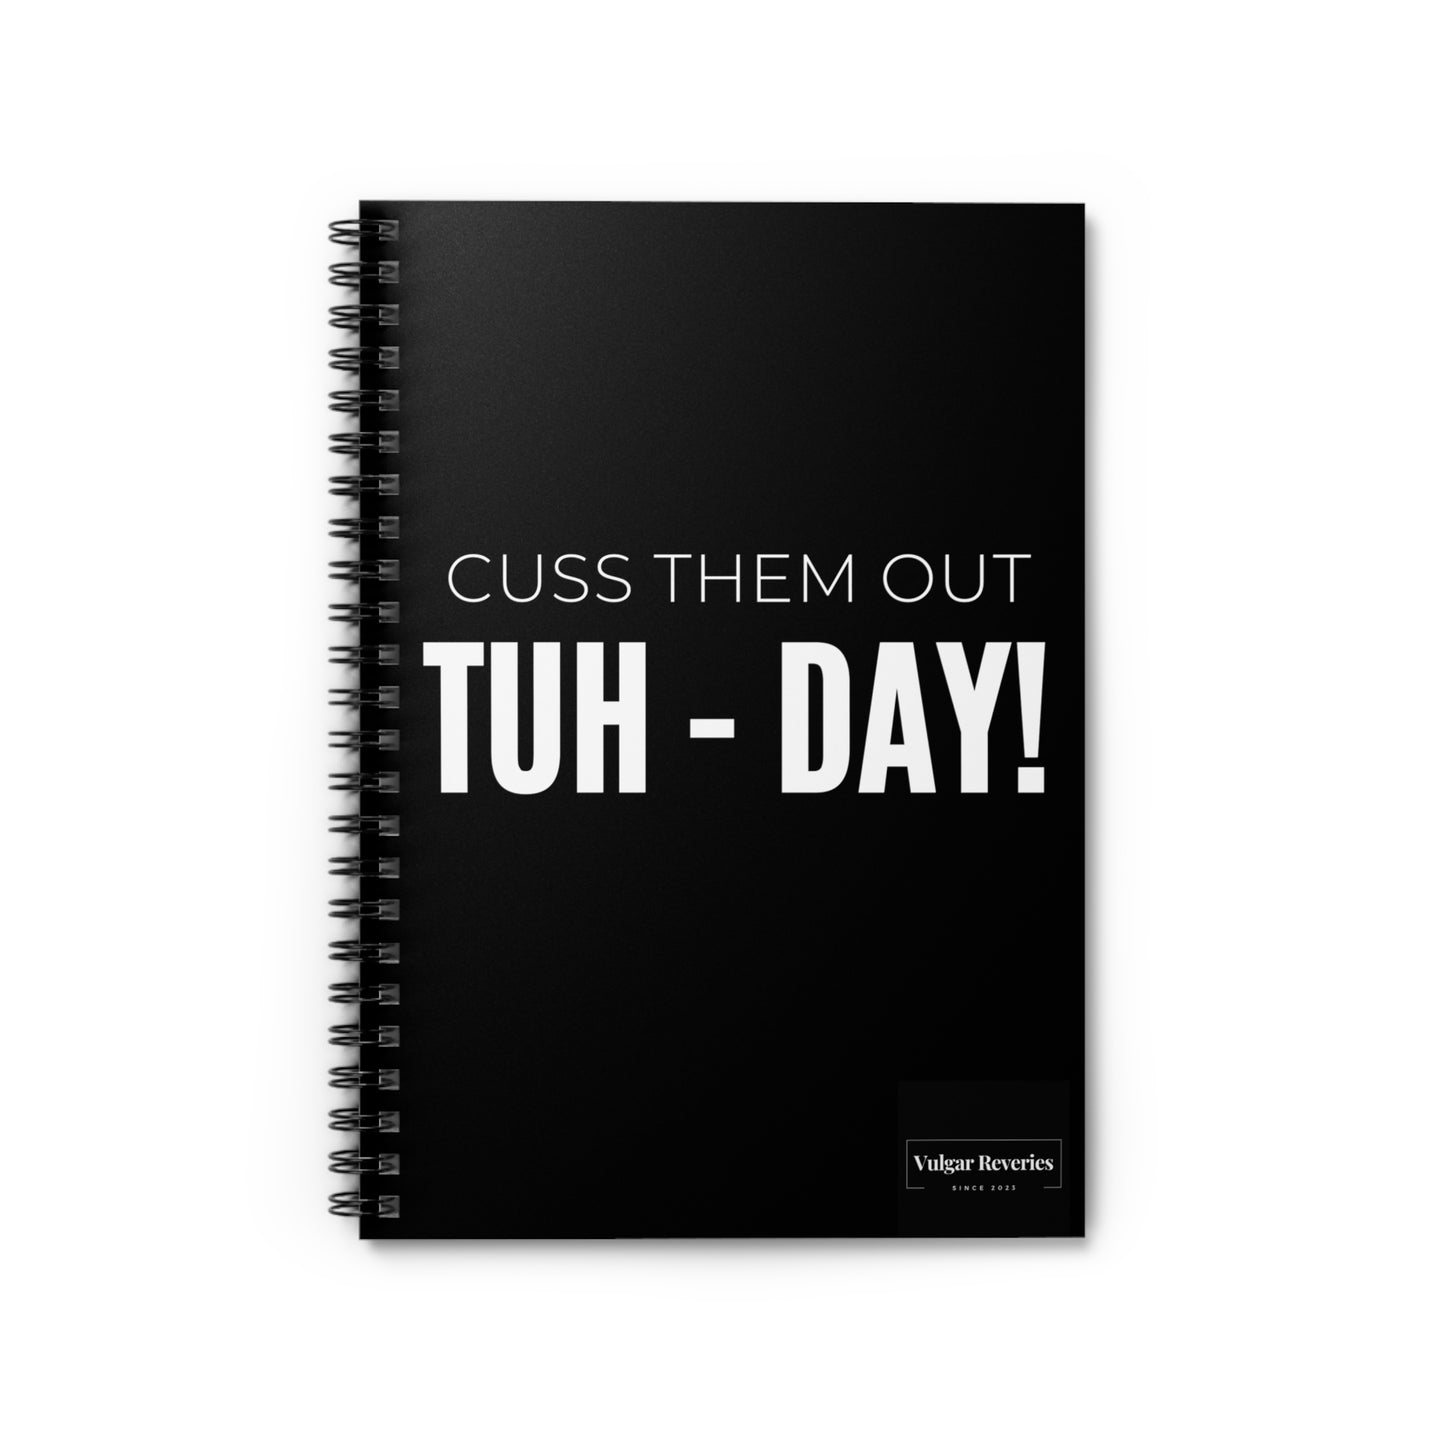 Cuss Them Out TUH-DAY! - Spiral Notebook - Ruled Line